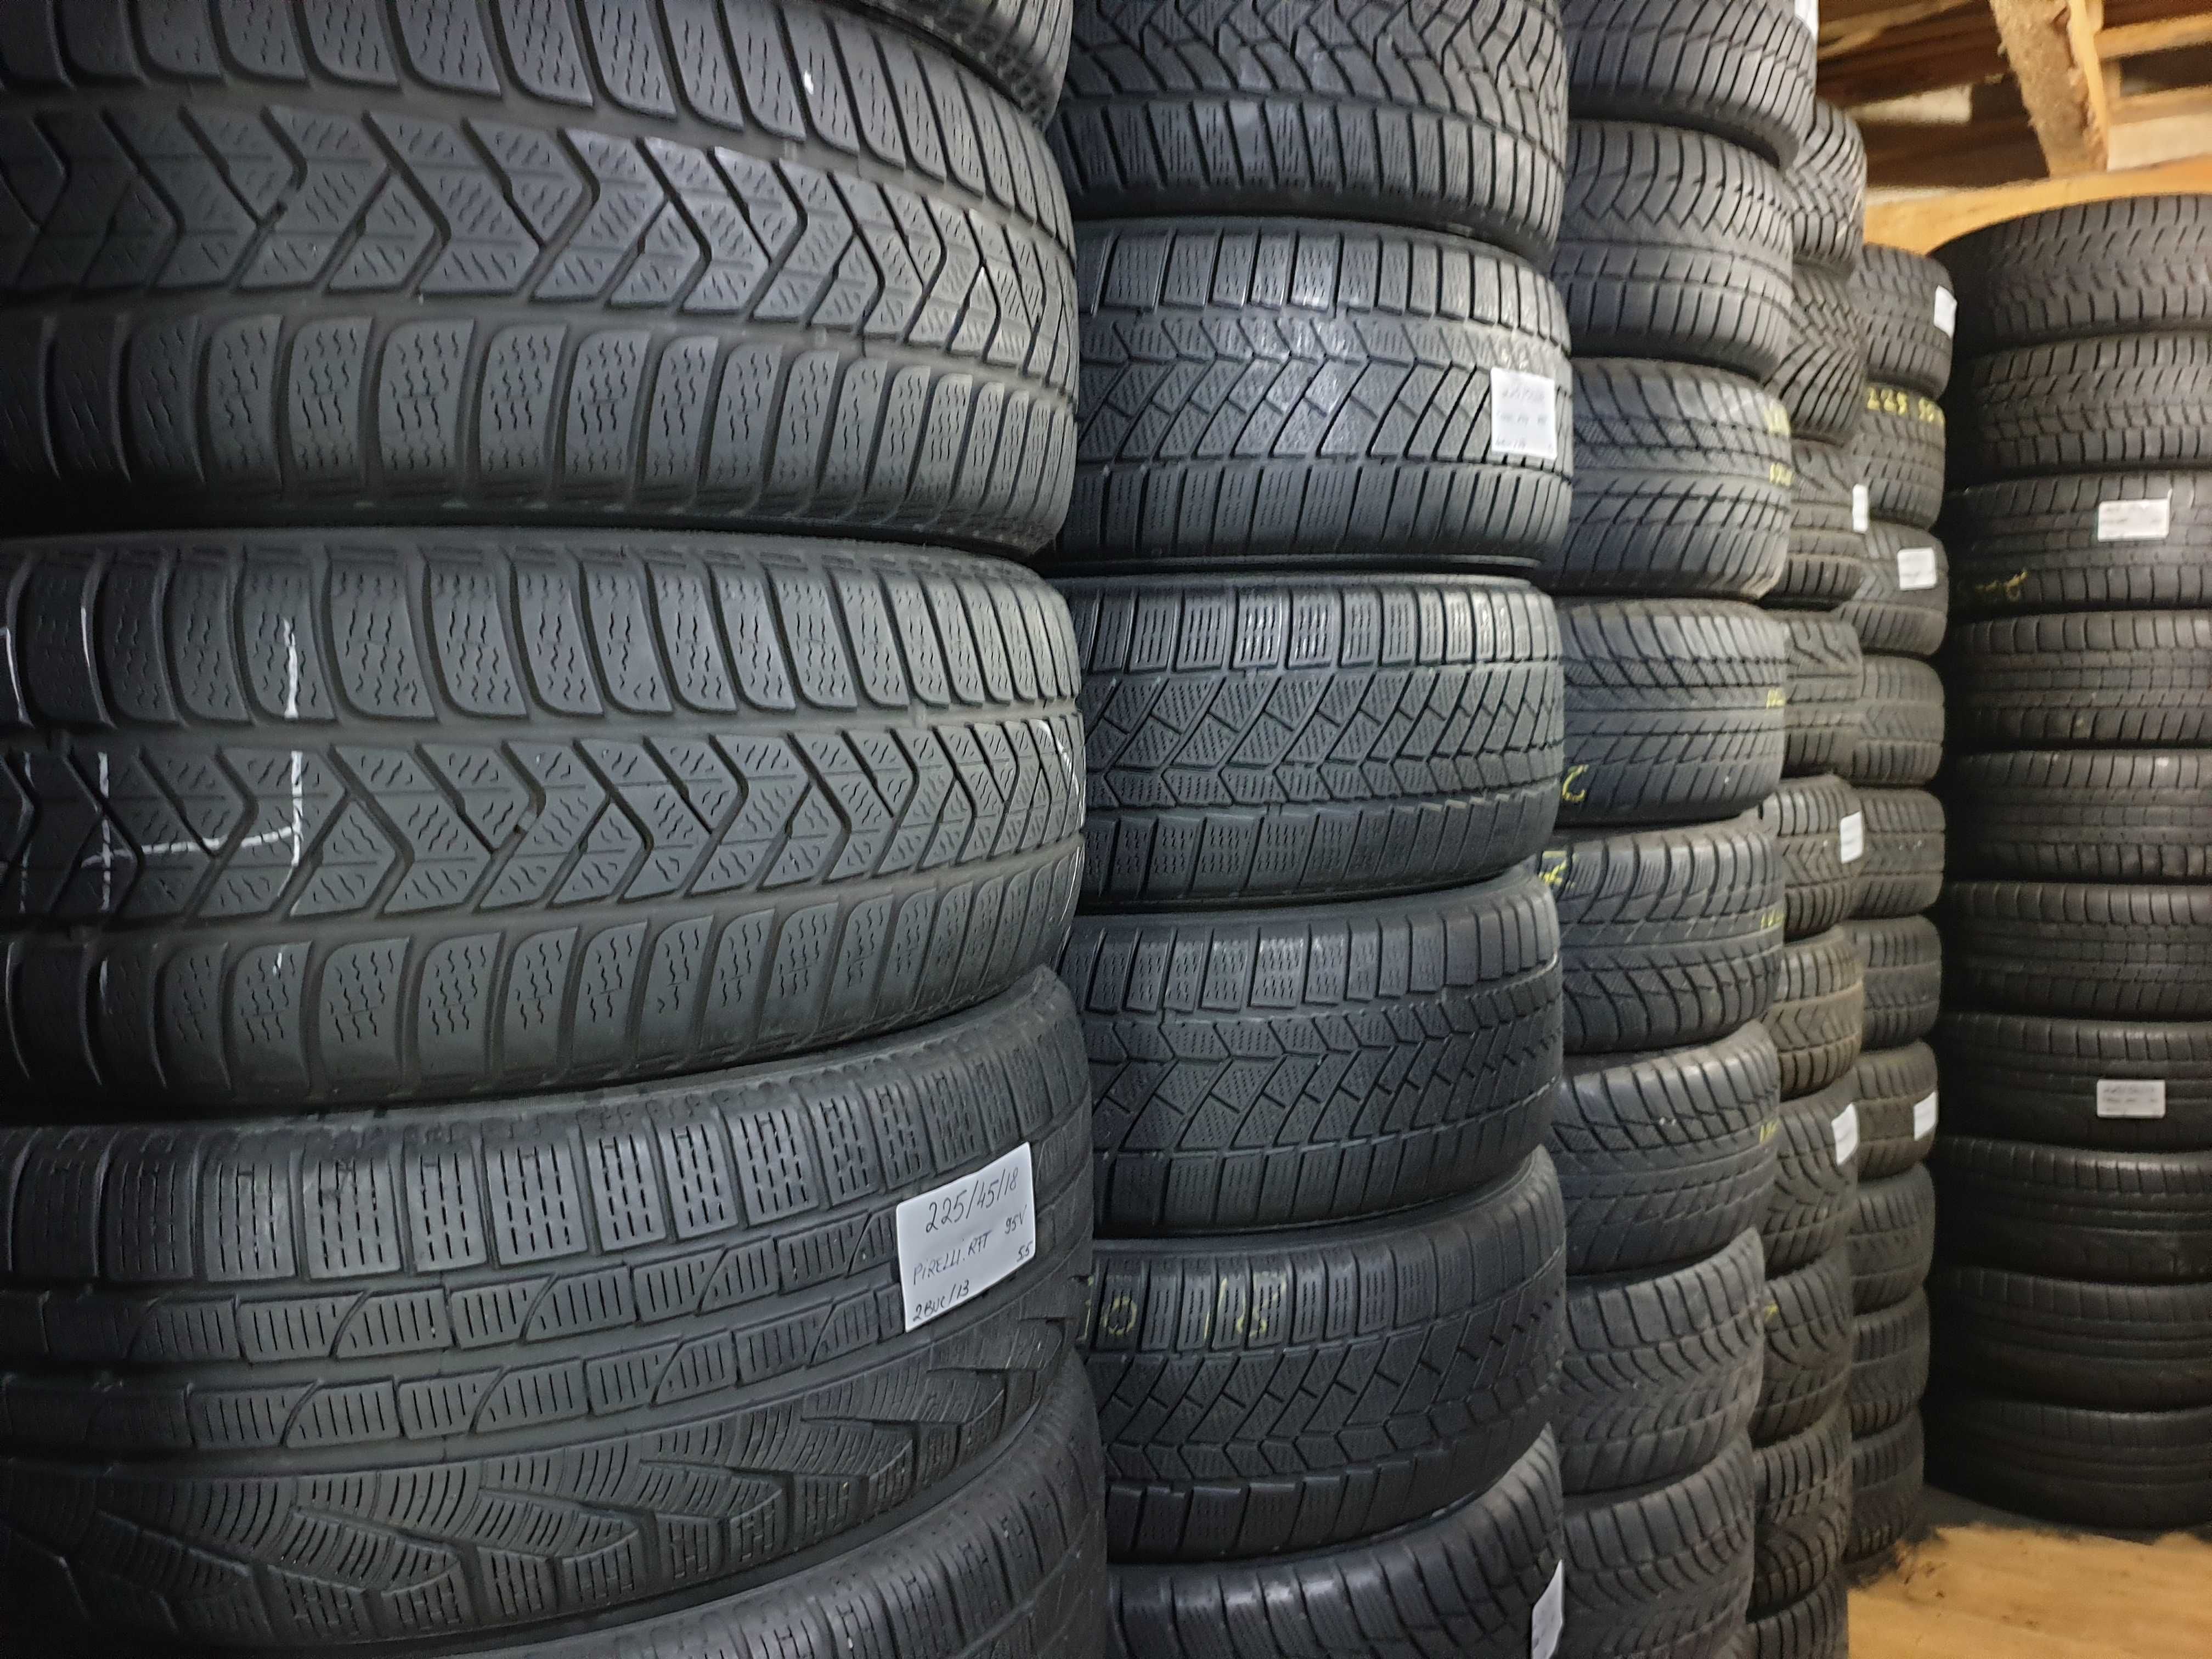 Anvelope Second Hand Michelin Vara-255/35 R19 96Y,in stoc R17/18/20